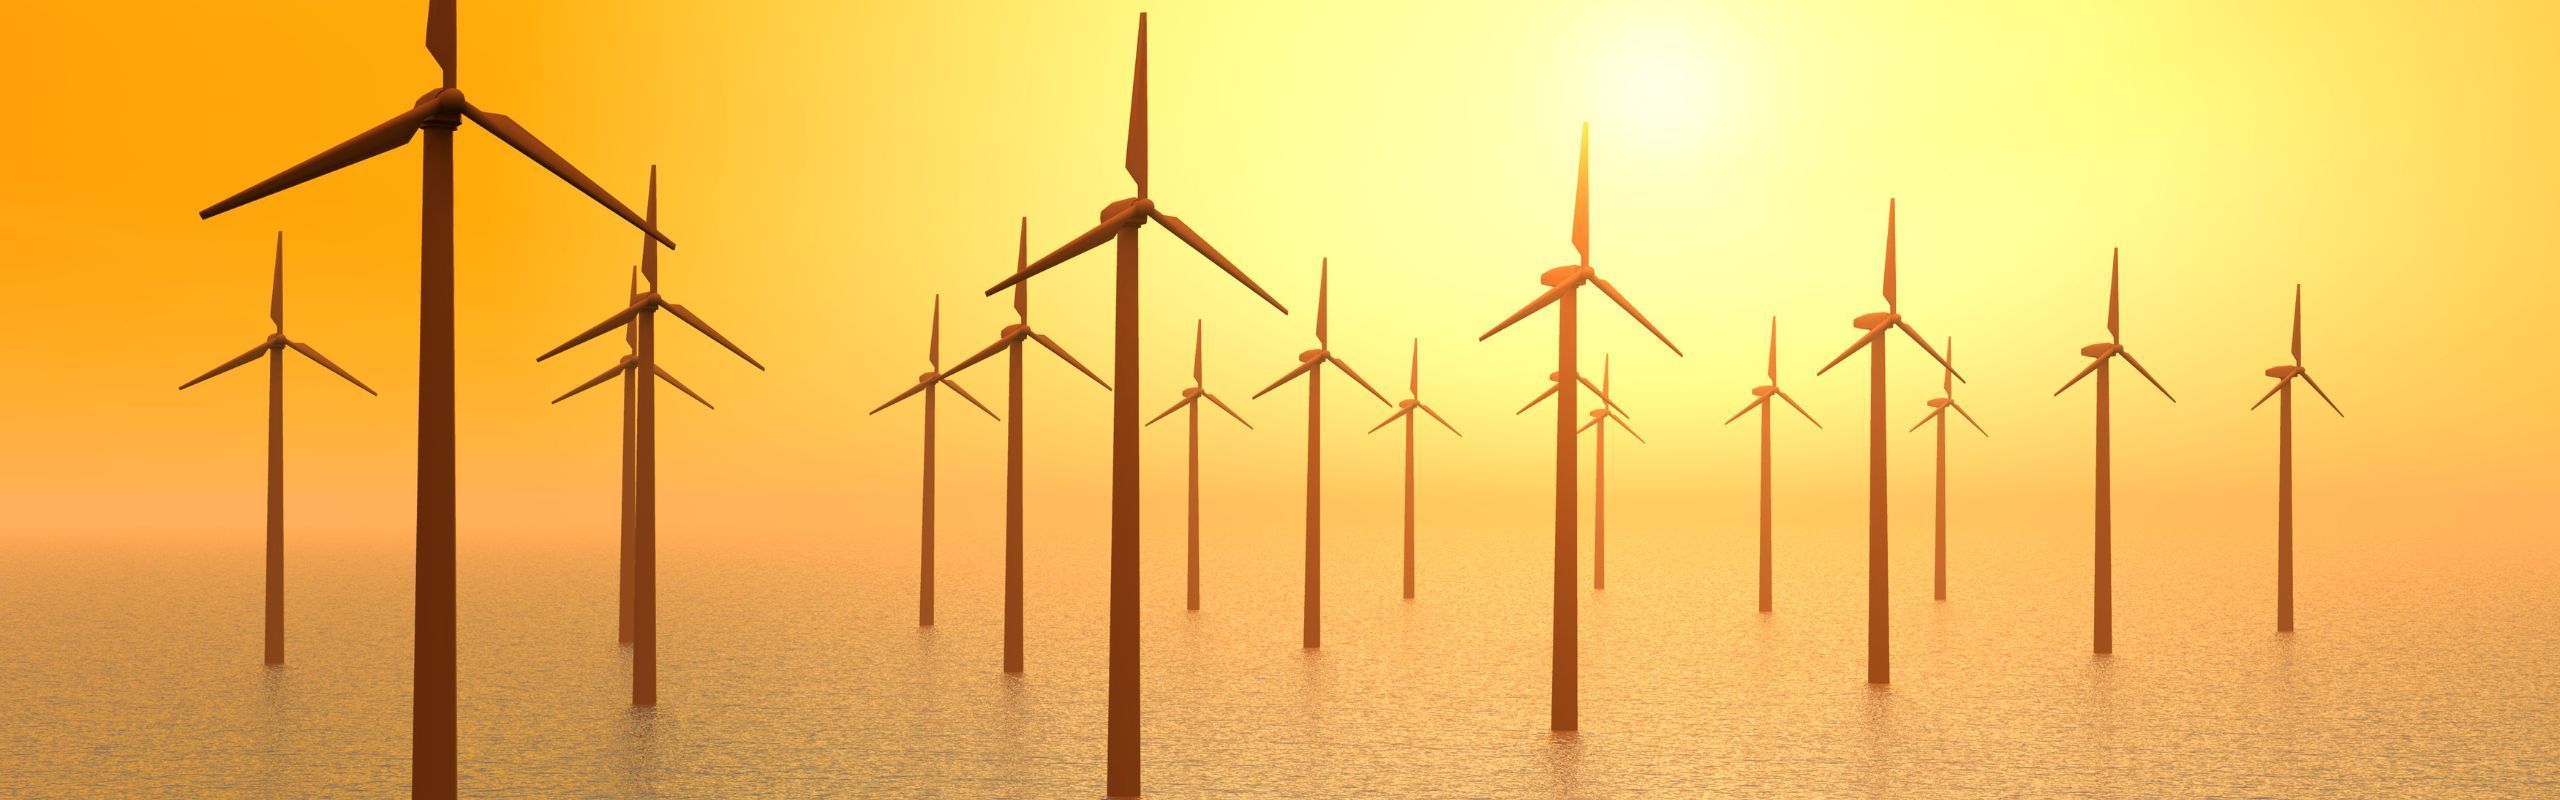 Image of wind turbines in the ocean against an orange sunset